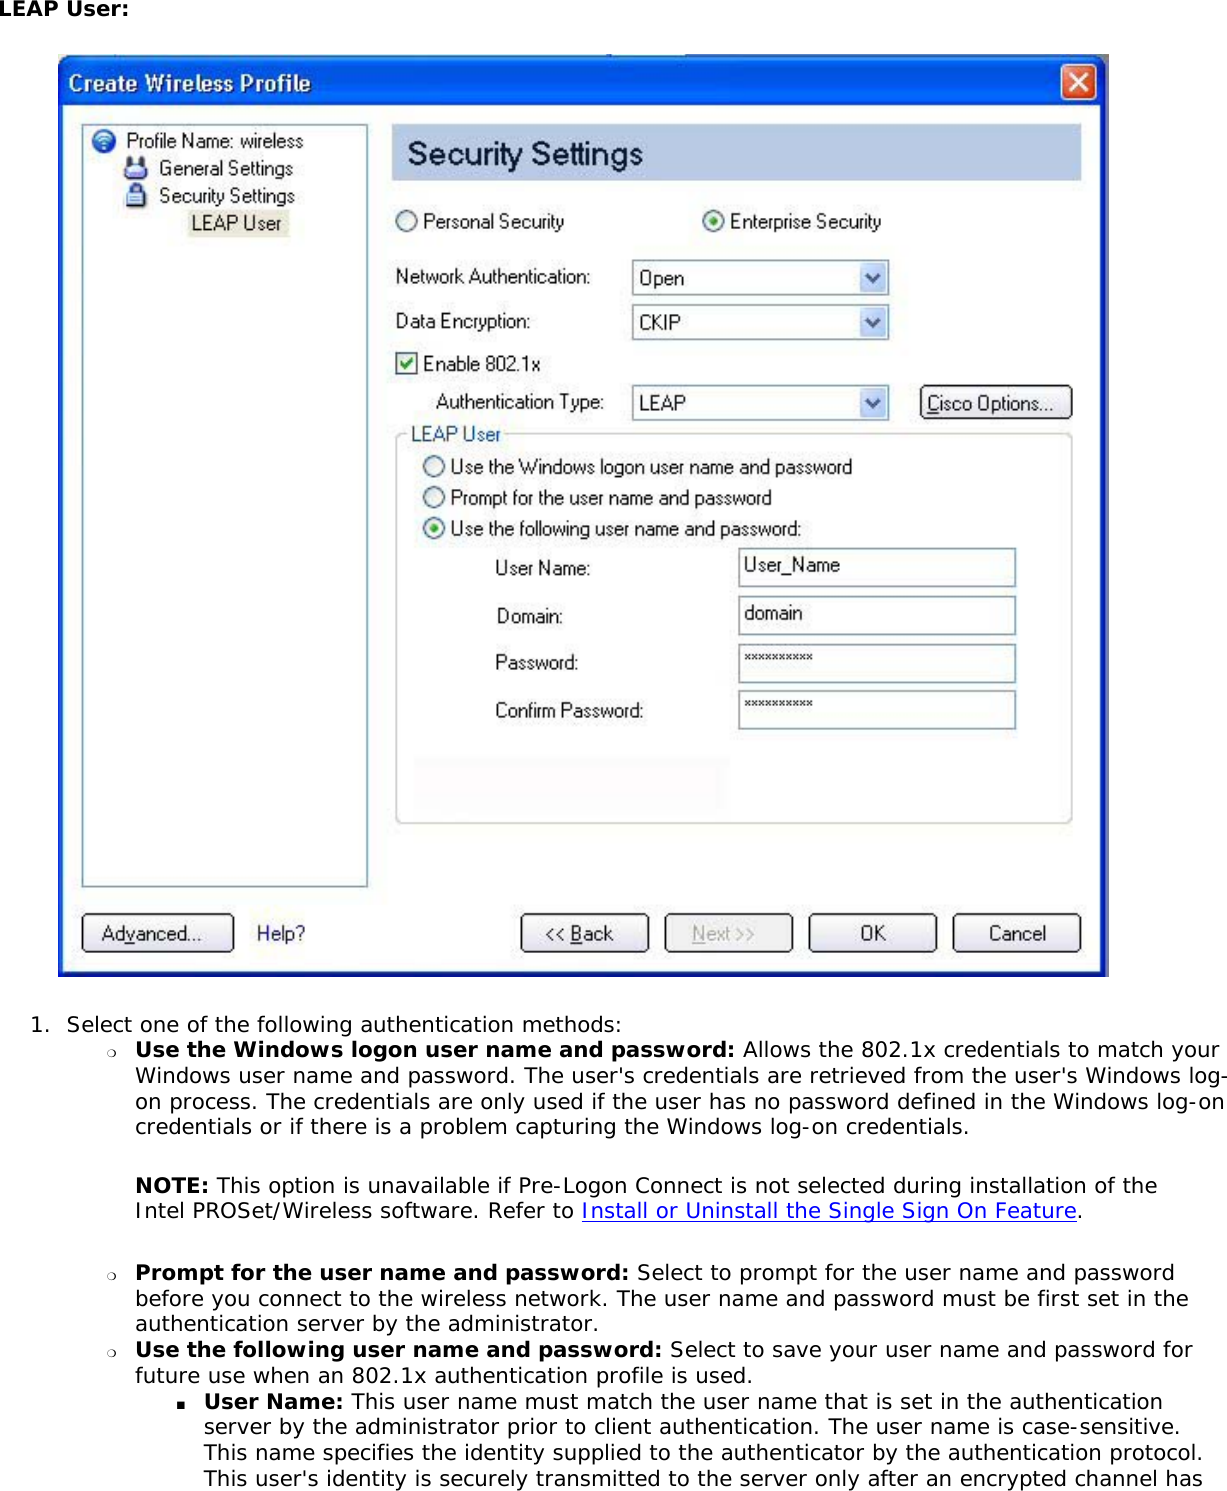 LEAP User: 1.  Select one of the following authentication methods: ❍     Use the Windows logon user name and password: Allows the 802.1x credentials to match your Windows user name and password. The user&apos;s credentials are retrieved from the user&apos;s Windows log-on process. The credentials are only used if the user has no password defined in the Windows log-on credentials or if there is a problem capturing the Windows log-on credentials.  NOTE: This option is unavailable if Pre-Logon Connect is not selected during installation of the Intel PROSet/Wireless software. Refer to Install or Uninstall the Single Sign On Feature. ❍     Prompt for the user name and password: Select to prompt for the user name and password before you connect to the wireless network. The user name and password must be first set in the authentication server by the administrator.❍     Use the following user name and password: Select to save your user name and password for future use when an 802.1x authentication profile is used. ■     User Name: This user name must match the user name that is set in the authentication server by the administrator prior to client authentication. The user name is case-sensitive. This name specifies the identity supplied to the authenticator by the authentication protocol. This user&apos;s identity is securely transmitted to the server only after an encrypted channel has 